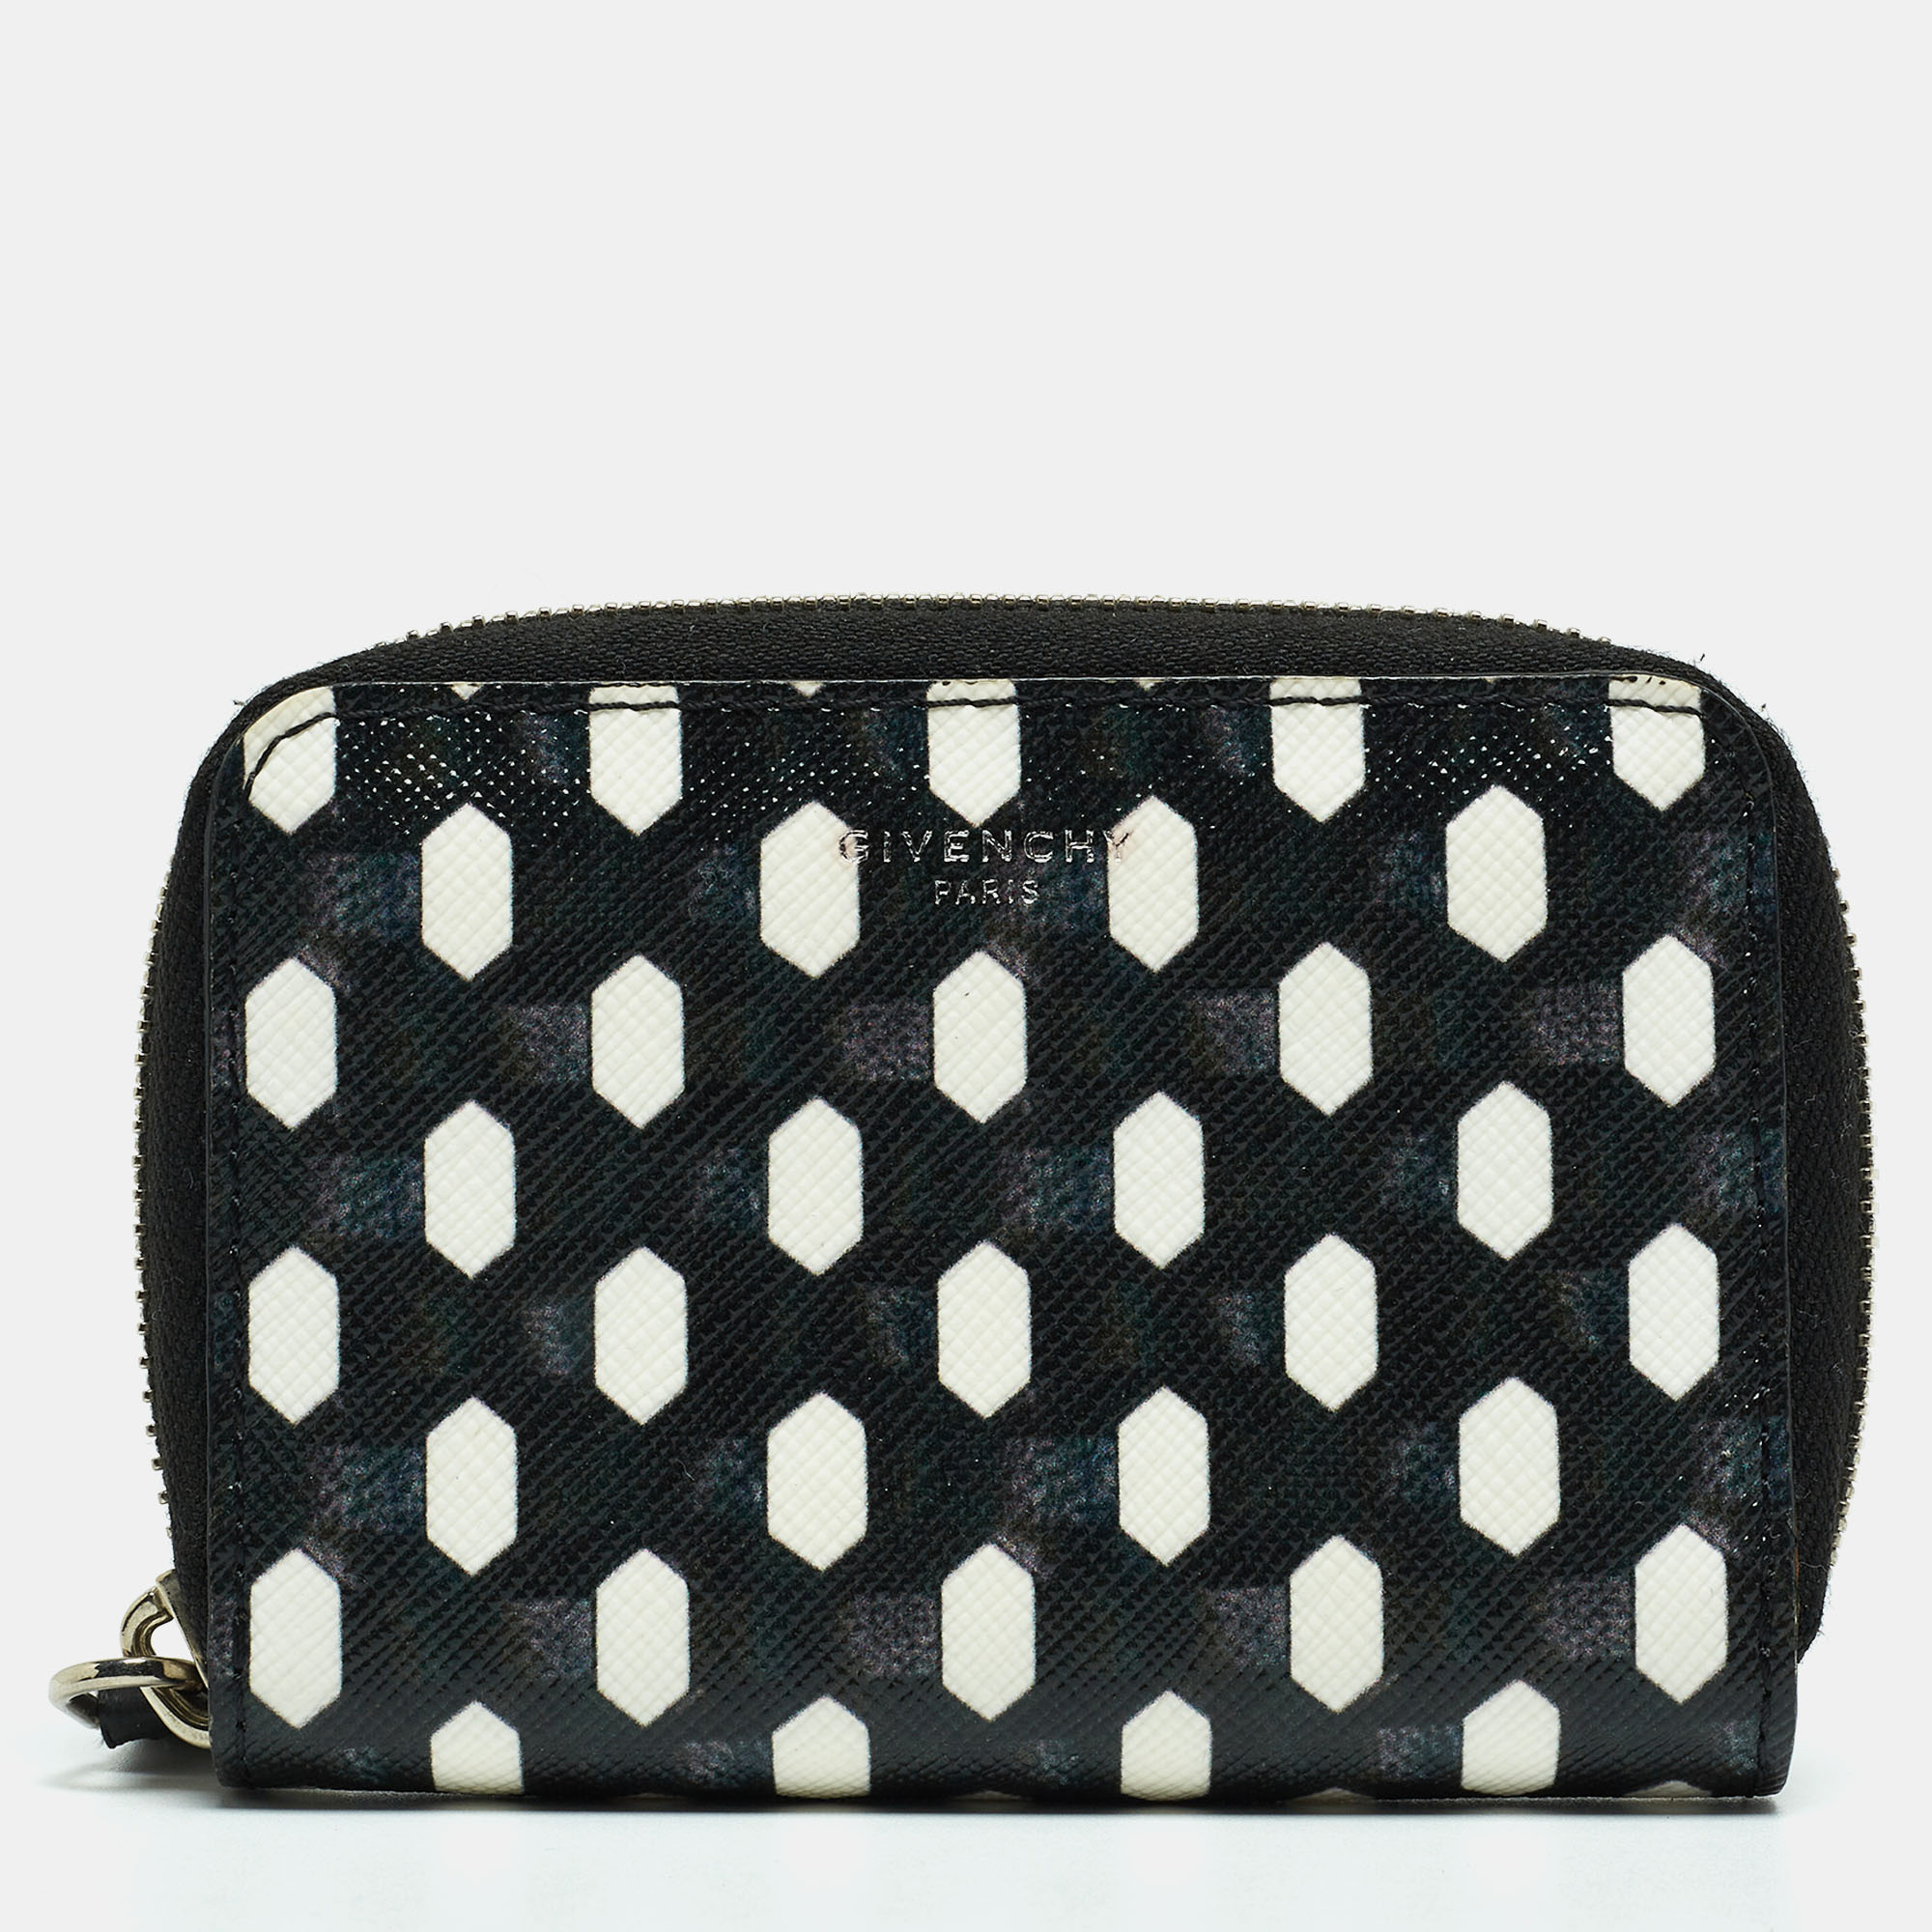 Givenchy Black/White Graphic Print Coated Canvas Zip Around Wallet